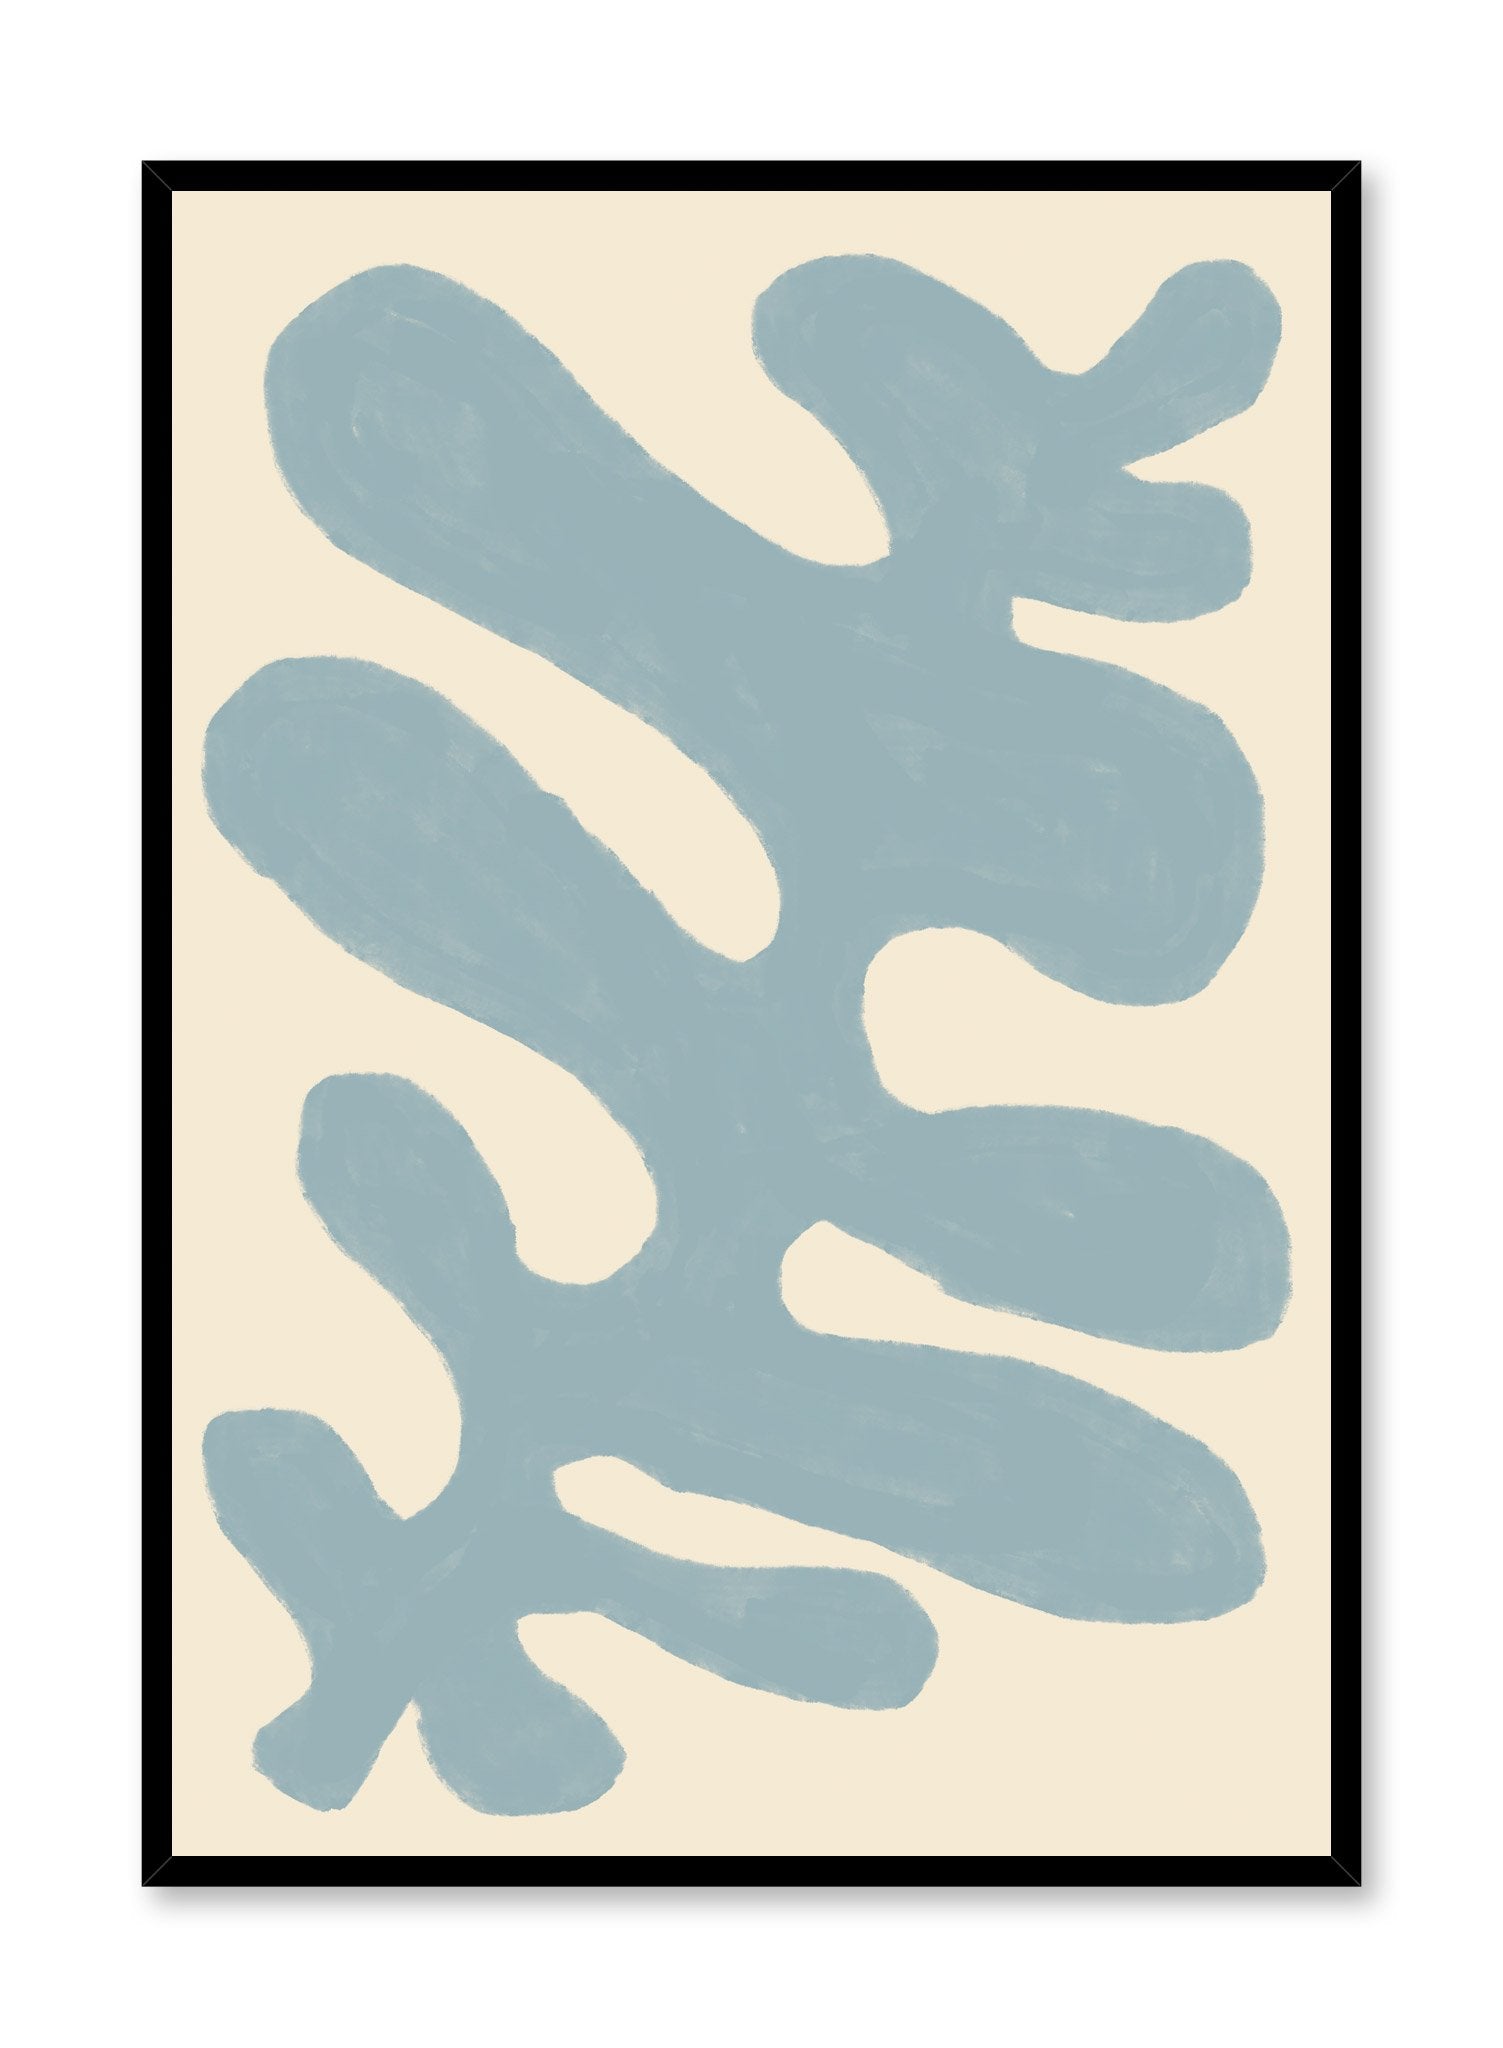 "Blue Algae" is a minimalist  botanical illustration poster by Opposite Wall of an abstract and vintage blue seaweed over a beige background. 